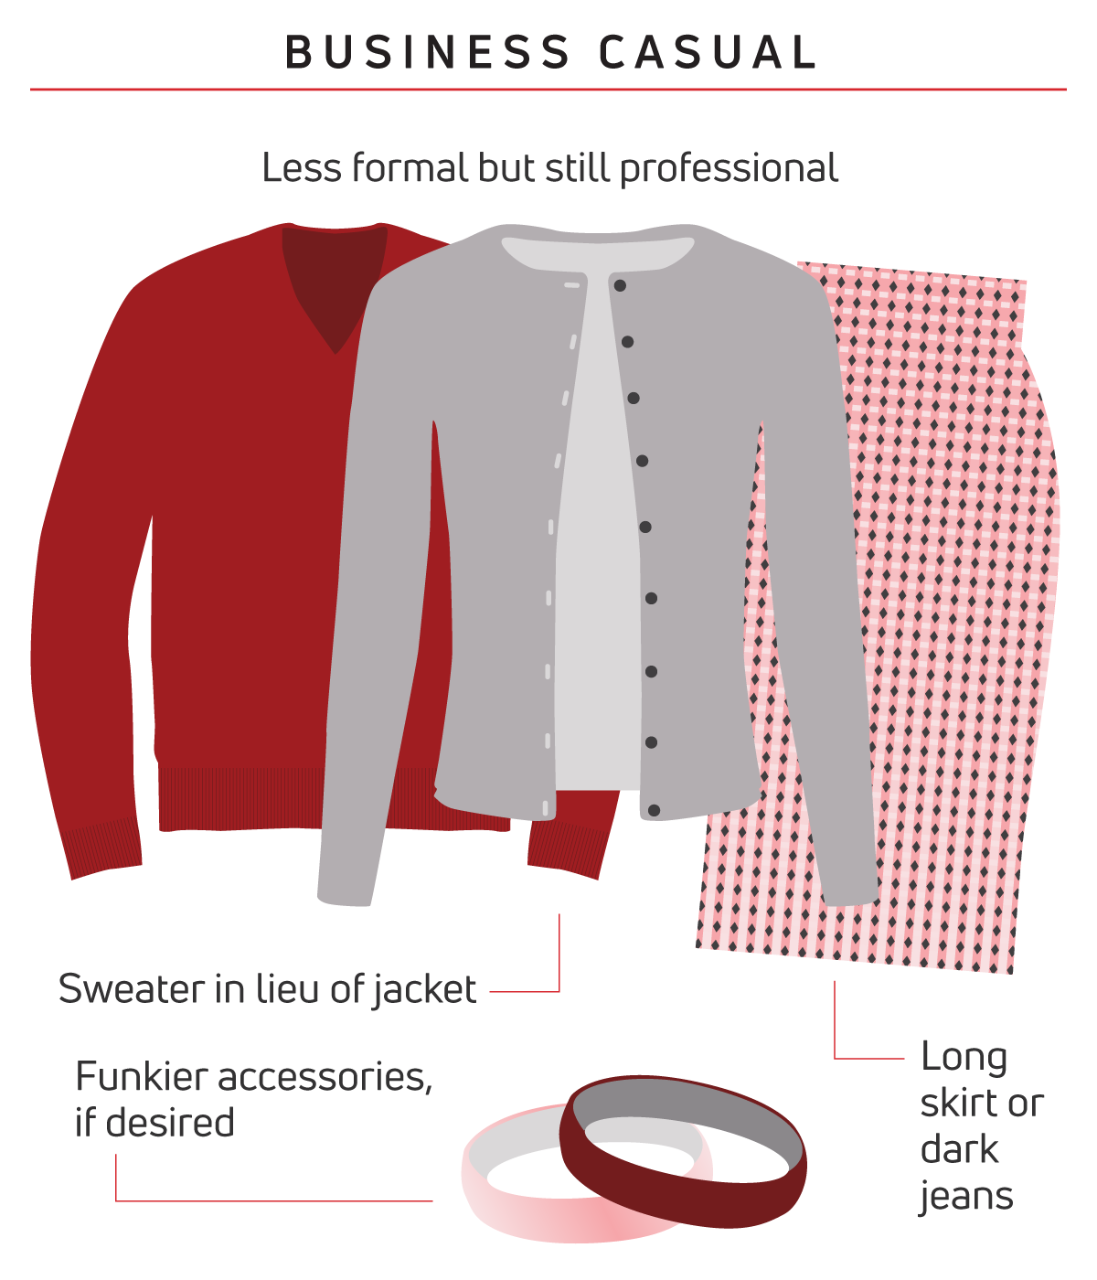 Business Clothes on a Budget - inChemistry